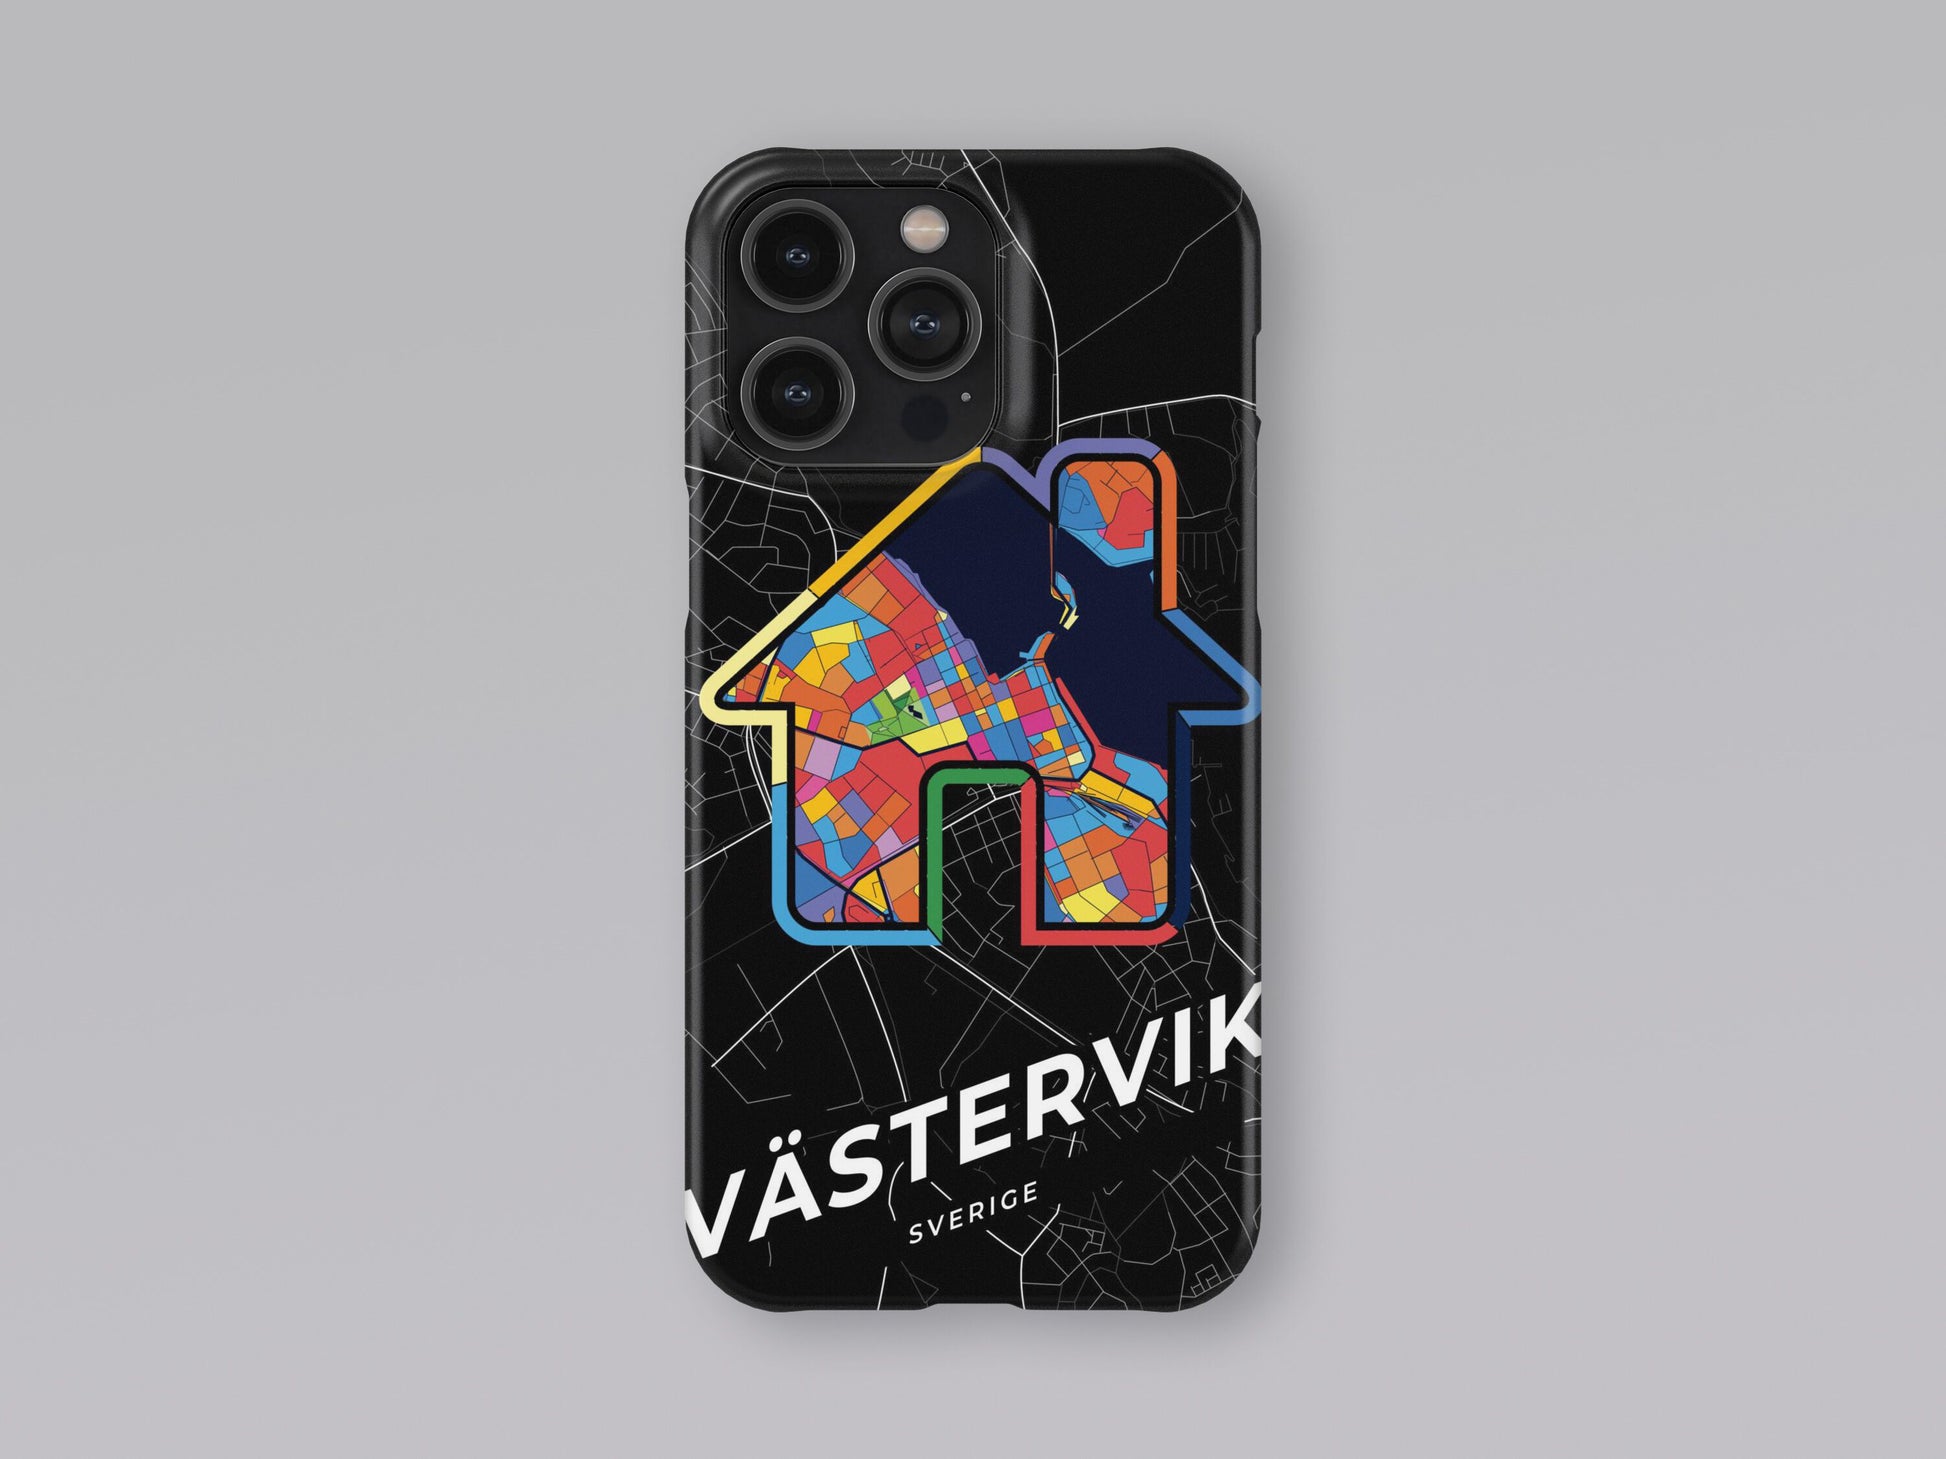 Västervik Sweden slim phone case with colorful icon 3